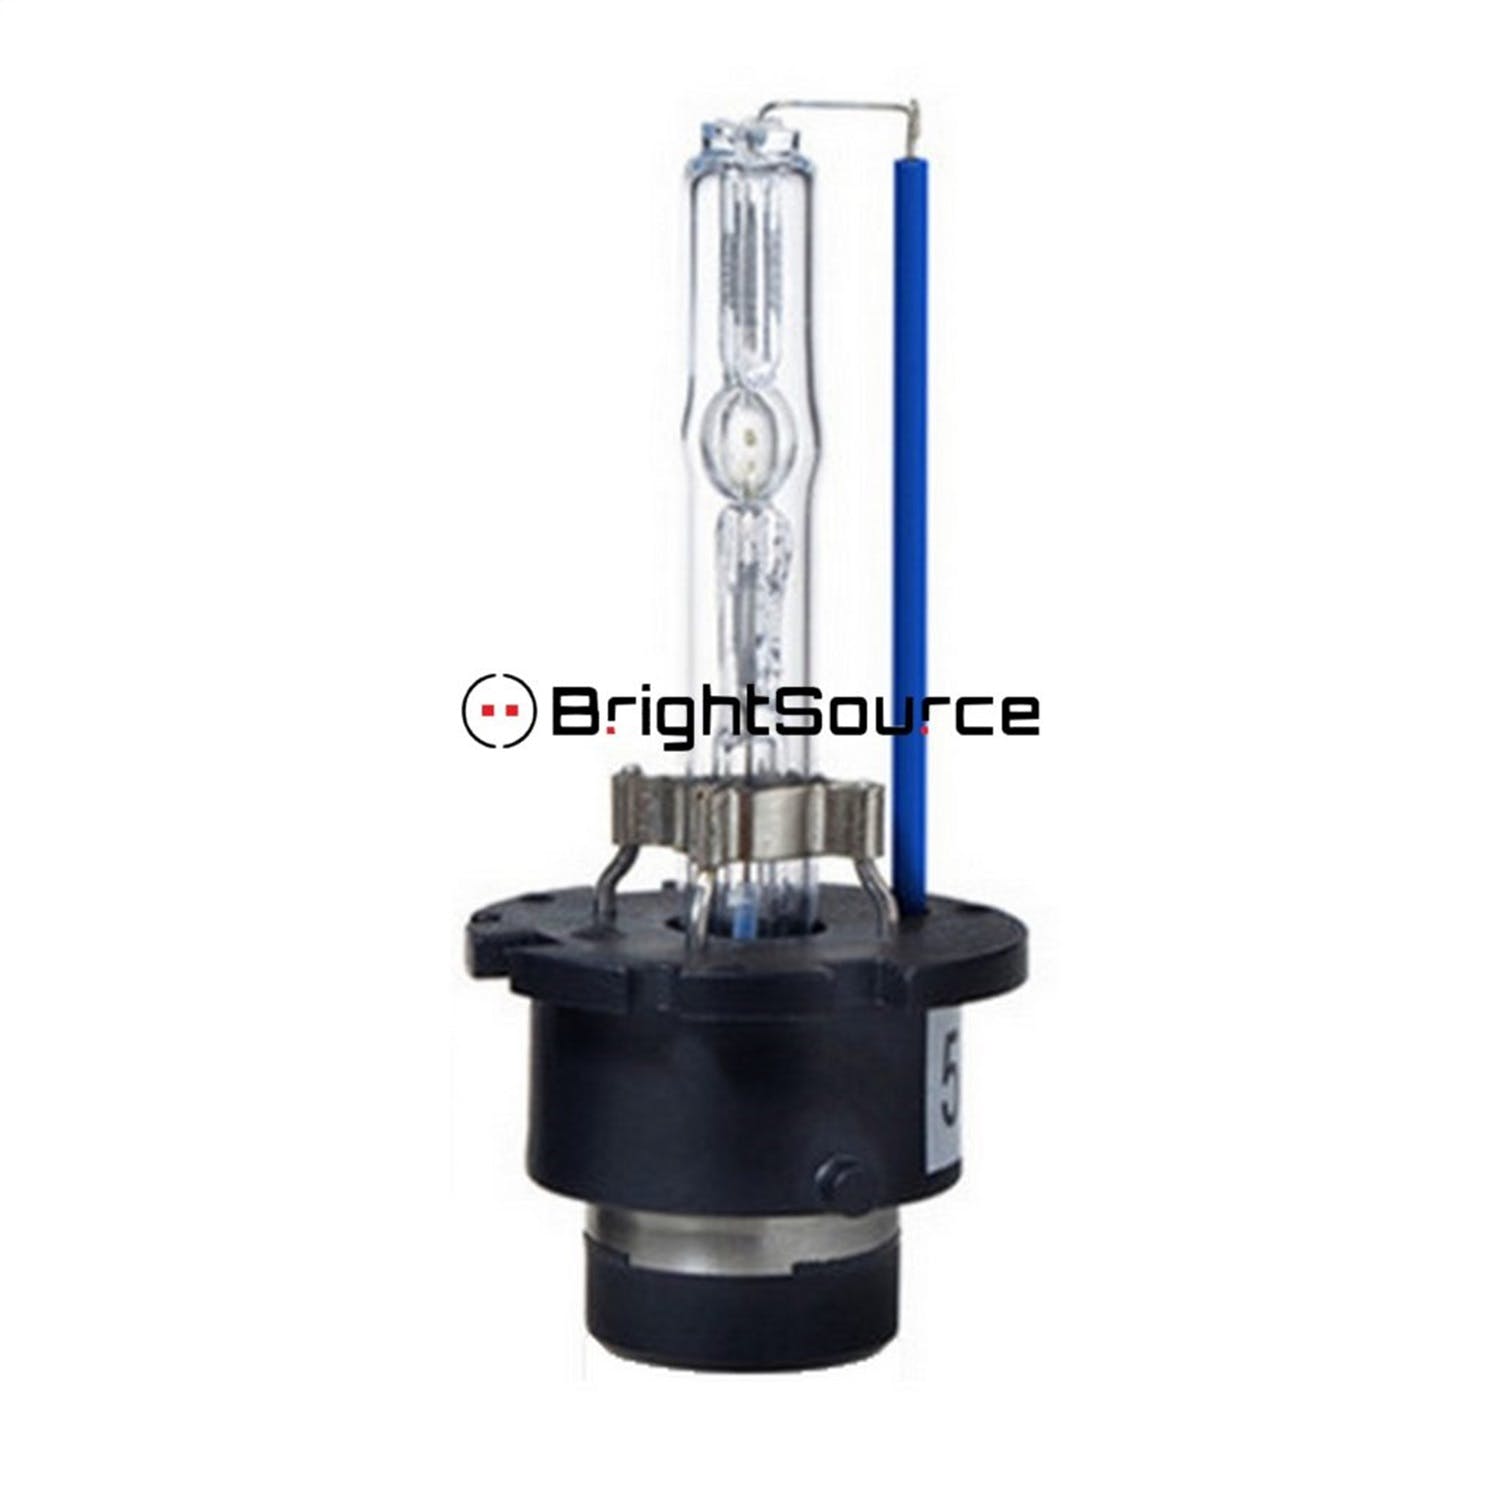 BrightSource D2S60 Single D2 OE Replacement/Upgrade Bulb 6000K